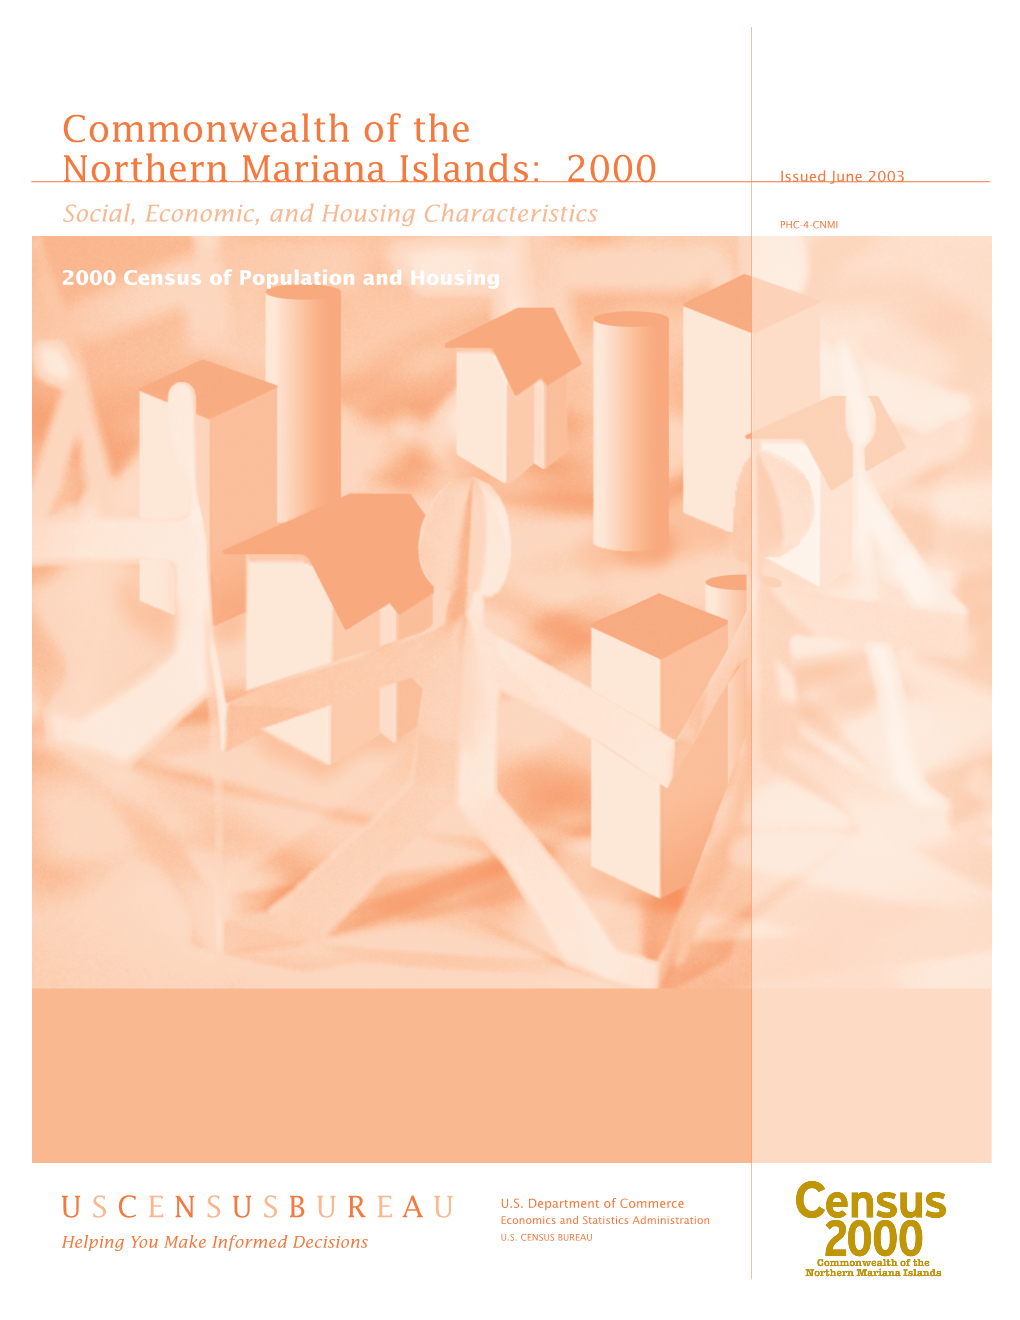 Social, Economic, and Housing Characteristics, Commonwealth of the Northern Mariana Islands: 2000